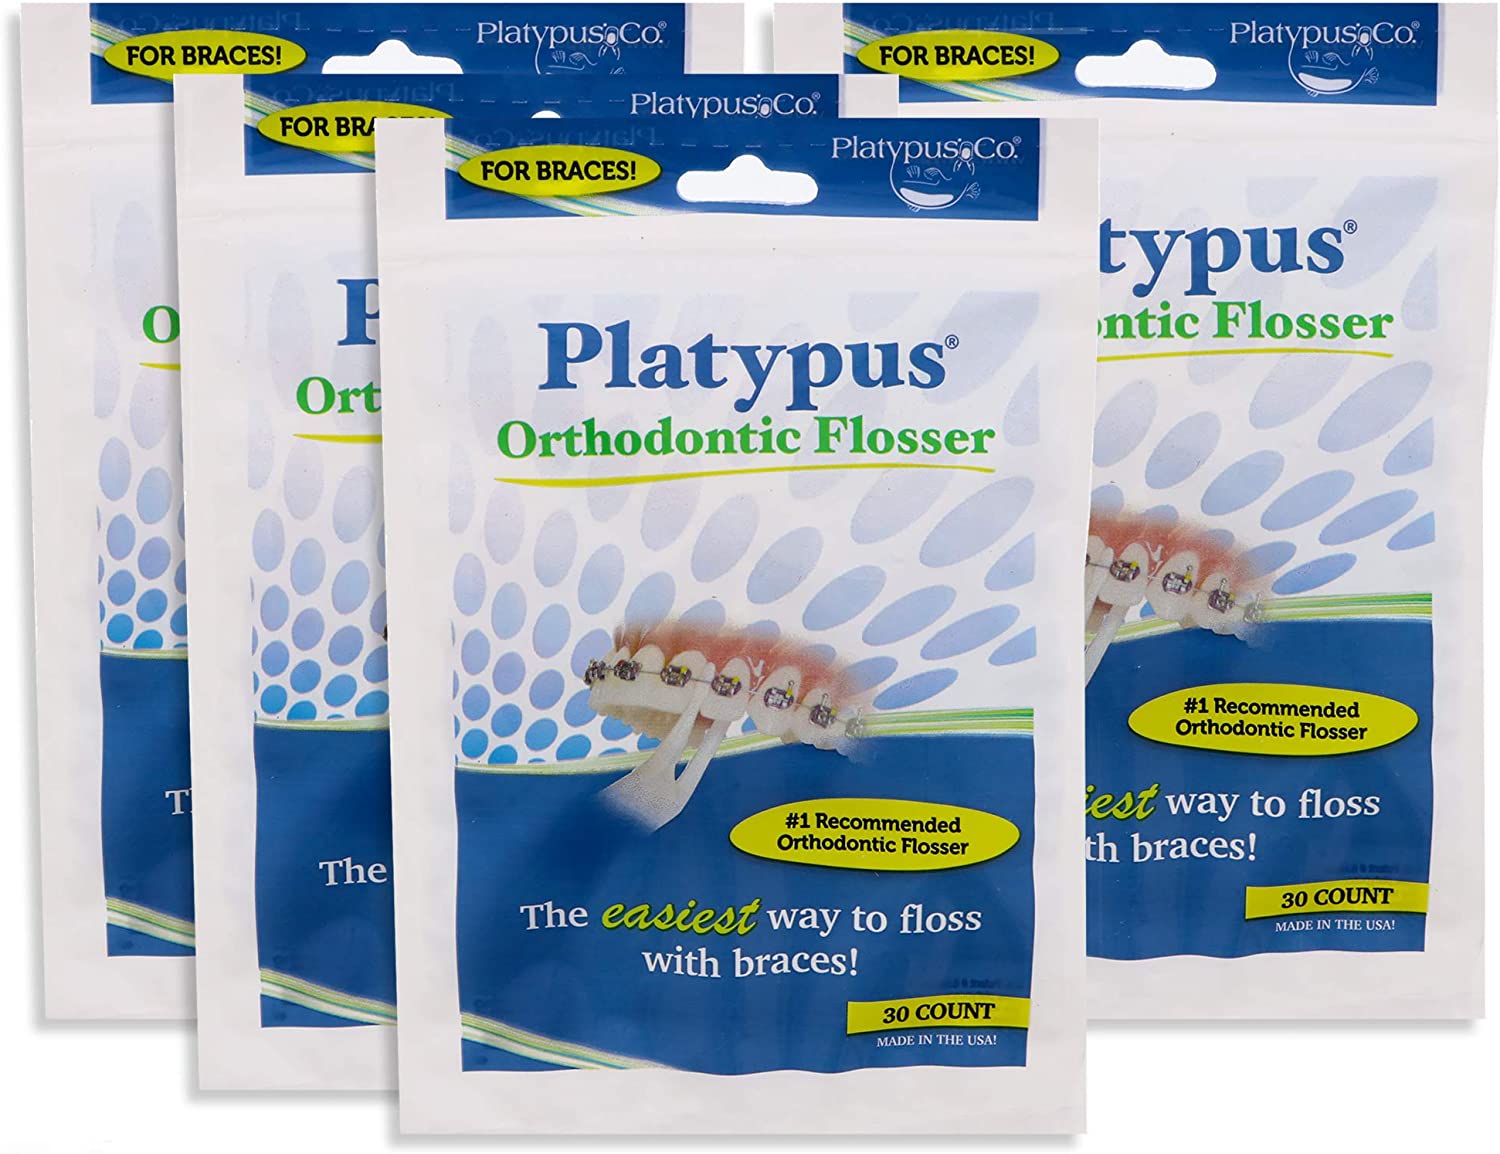 Platypus Orthodontic Flossers for Braces - Dental Floss Picks for Braces, Fits Under Arch Wire, Will Not Damage Braces, Increase Flossing Compliance, Floss Teeth in Less Than Two Minutes - 30 Count